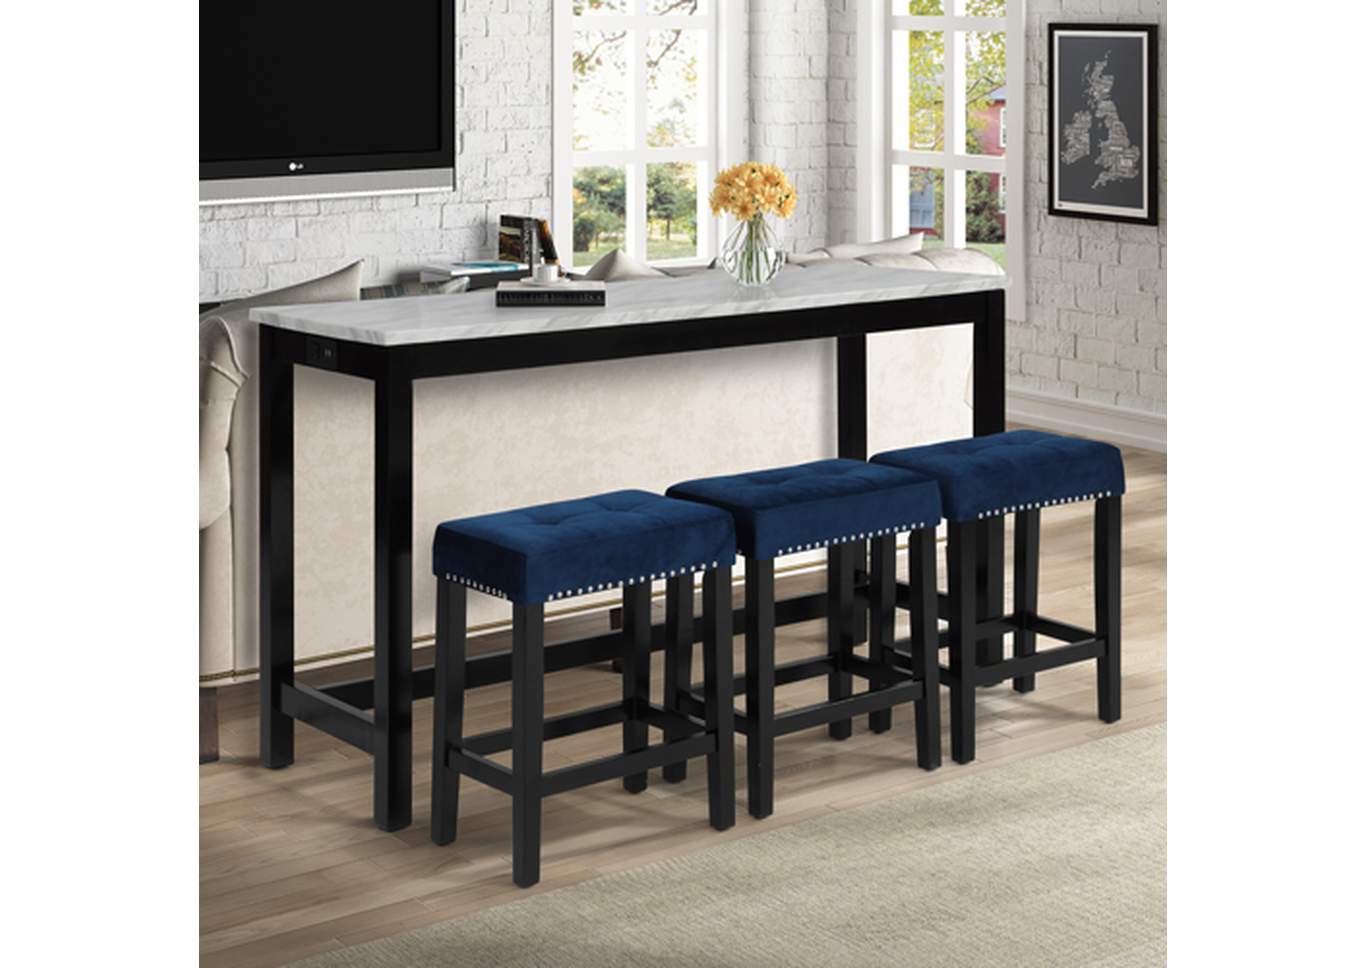 Celeste Theater Bar Table w/3 Stools,New Classic